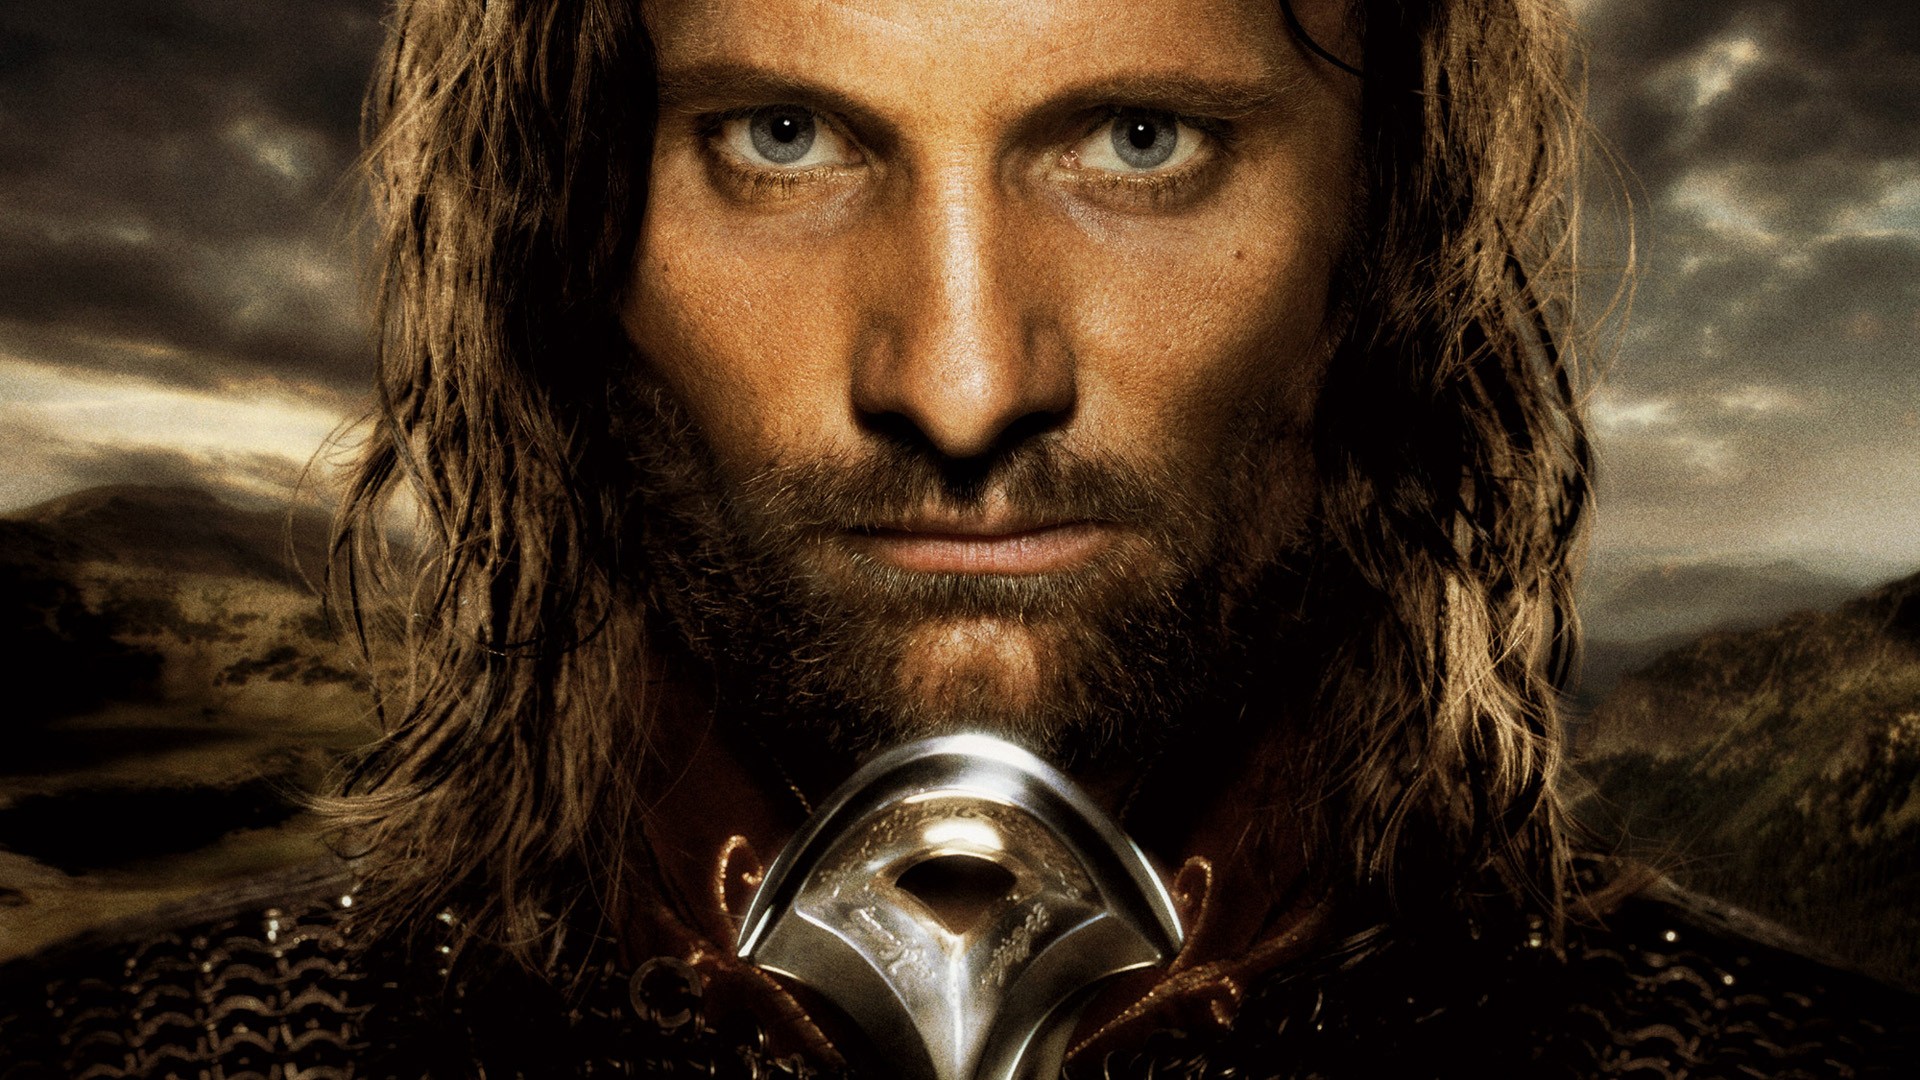 General 1920x1080 movies The Lord of the Rings The Lord of the Rings: The Return of the King Aragorn Viggo Mortensen actor Peter Jackson movie characters book characters J. R. R. Tolkien